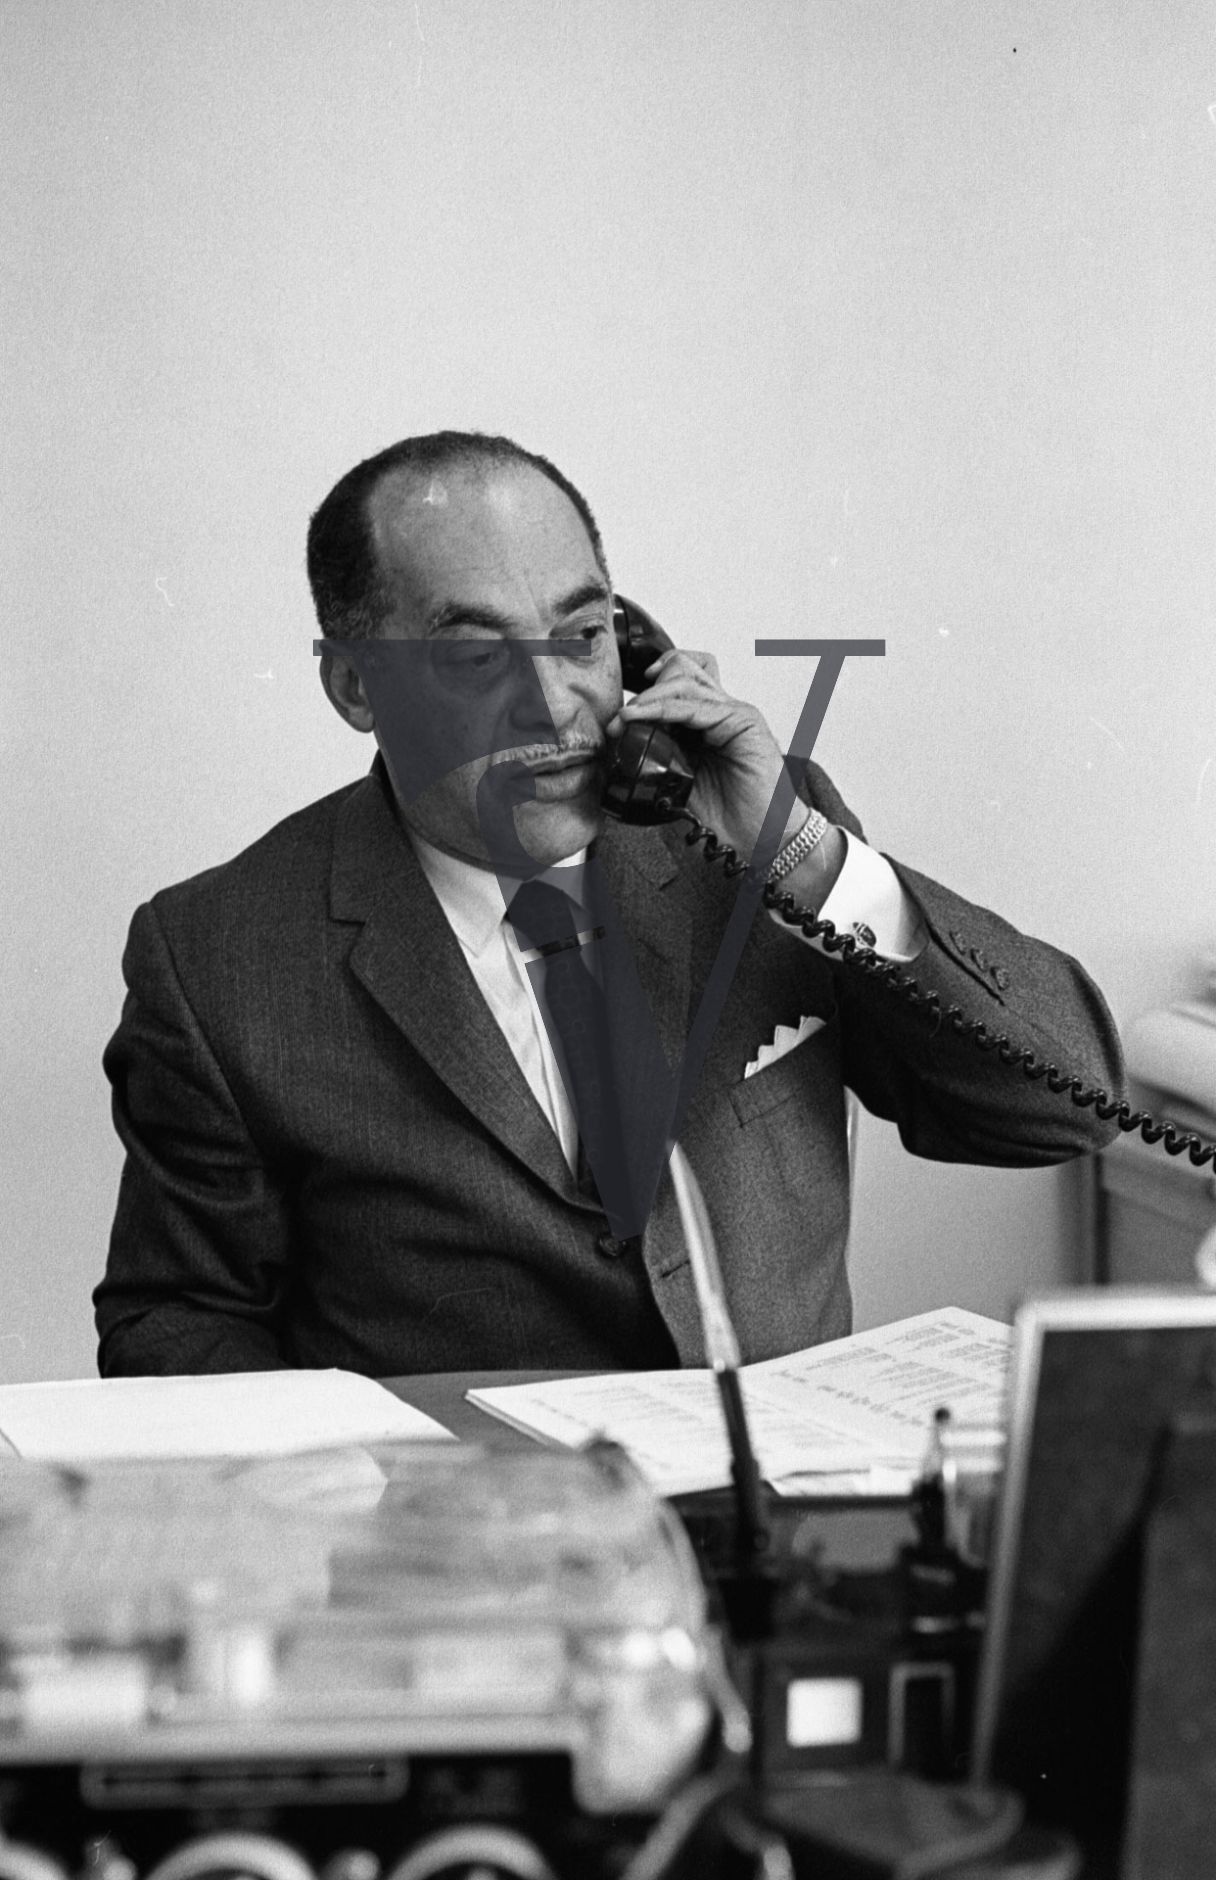 Director of the Board of Eduction, New York, portrait, telephone.